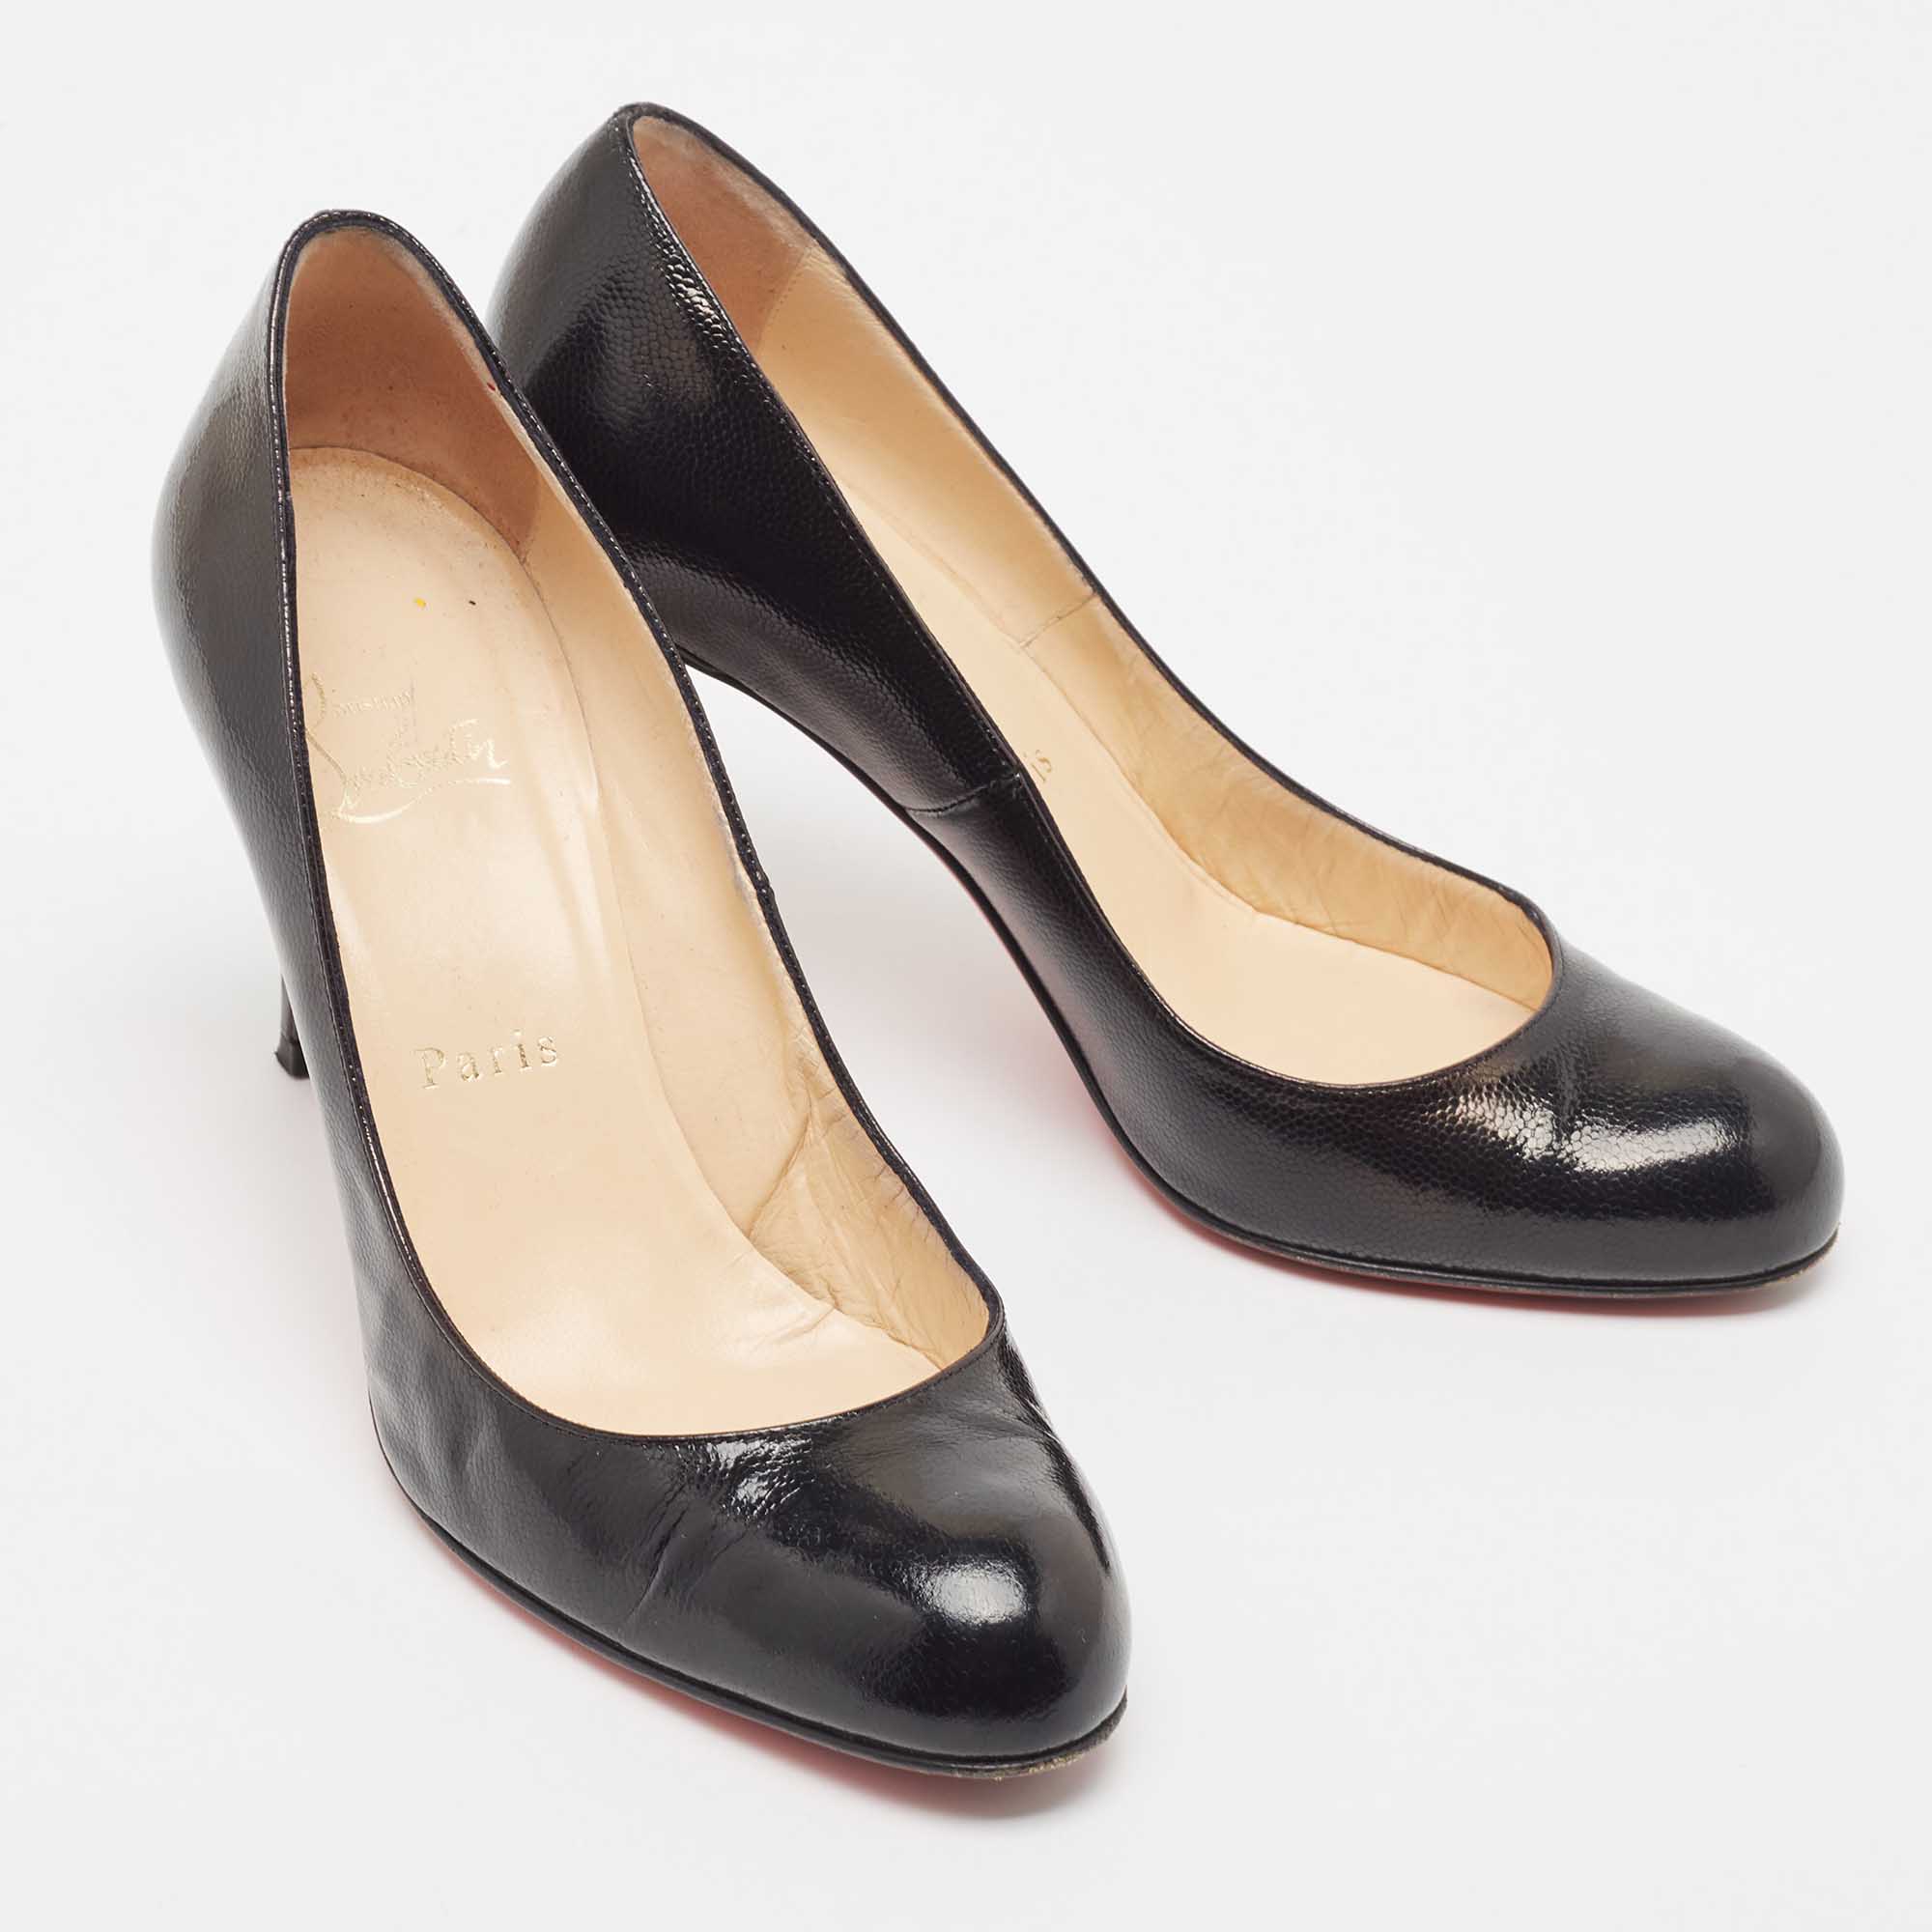 Christian Louboutin Black Grained Leather Simple Pumps Size 37